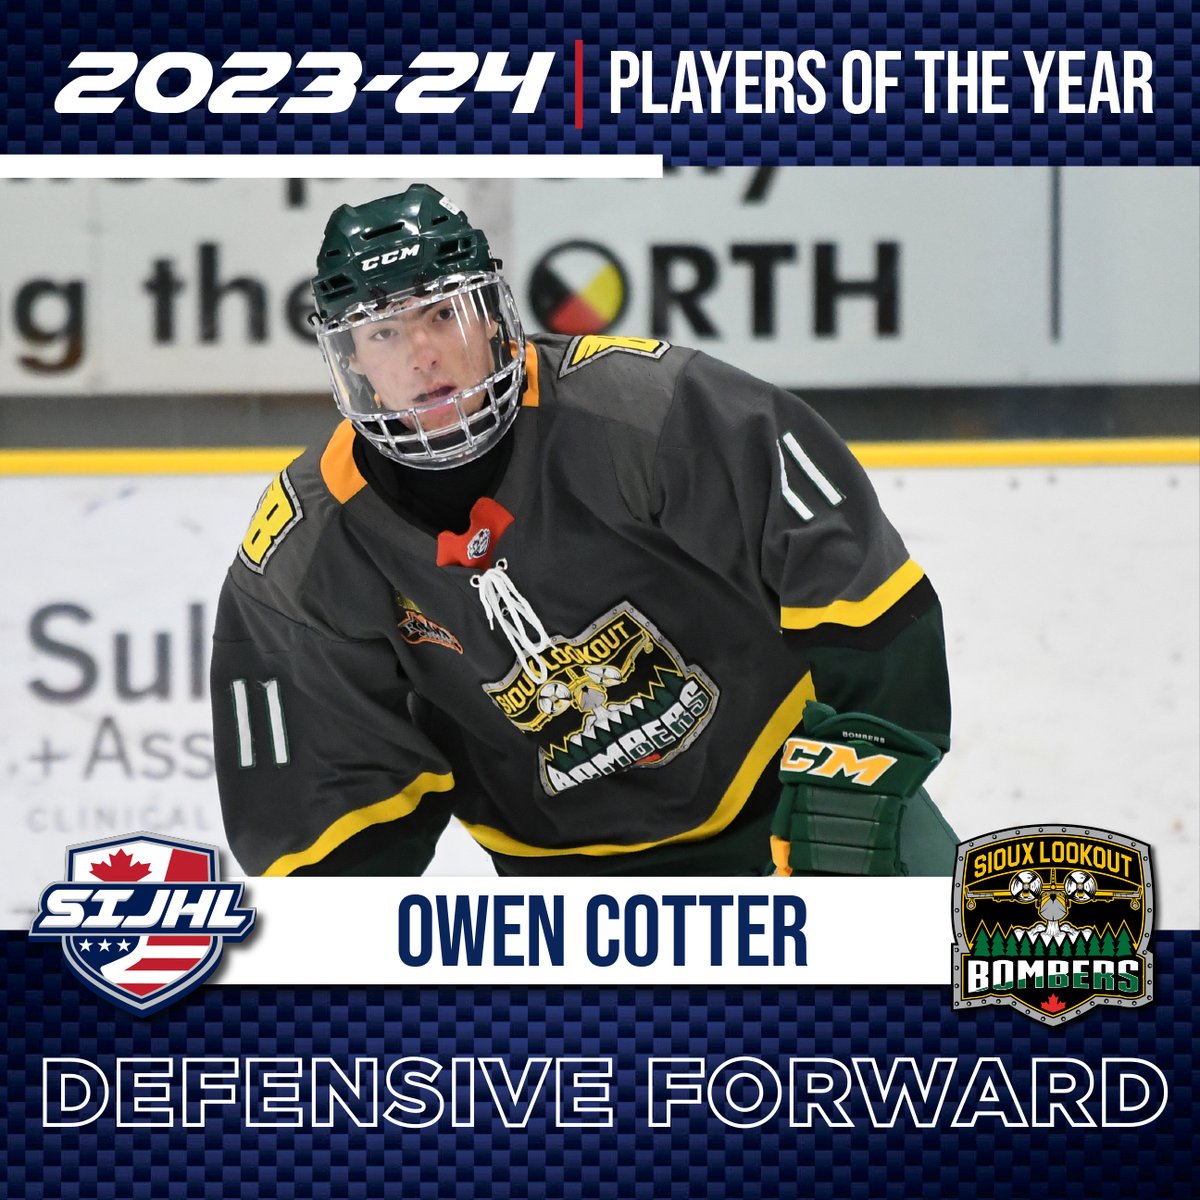 Owen Cotter of the @SLBombers is the 2023-24 SIJHL Defensive Forward of the Year. Congratulations, Owen!